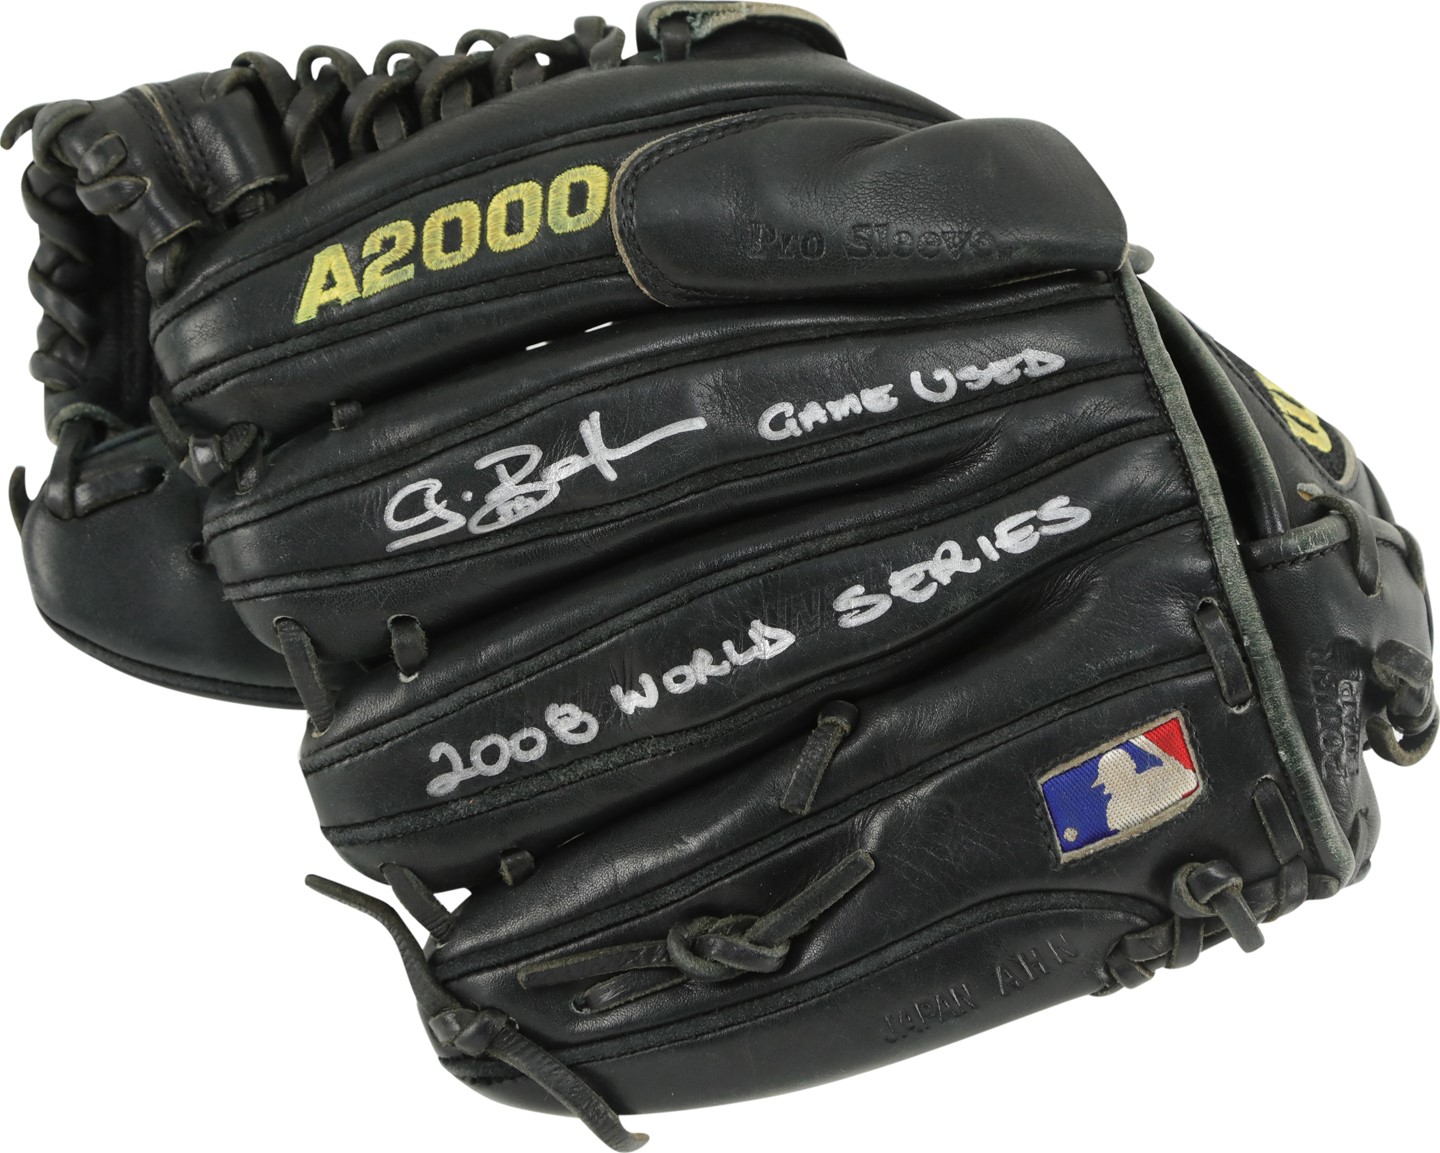 Baseball Equipment - 2008 Grant Balfour World Series Games 1, 3, 5 Signed Game Worn Glove (Photo-Matched)